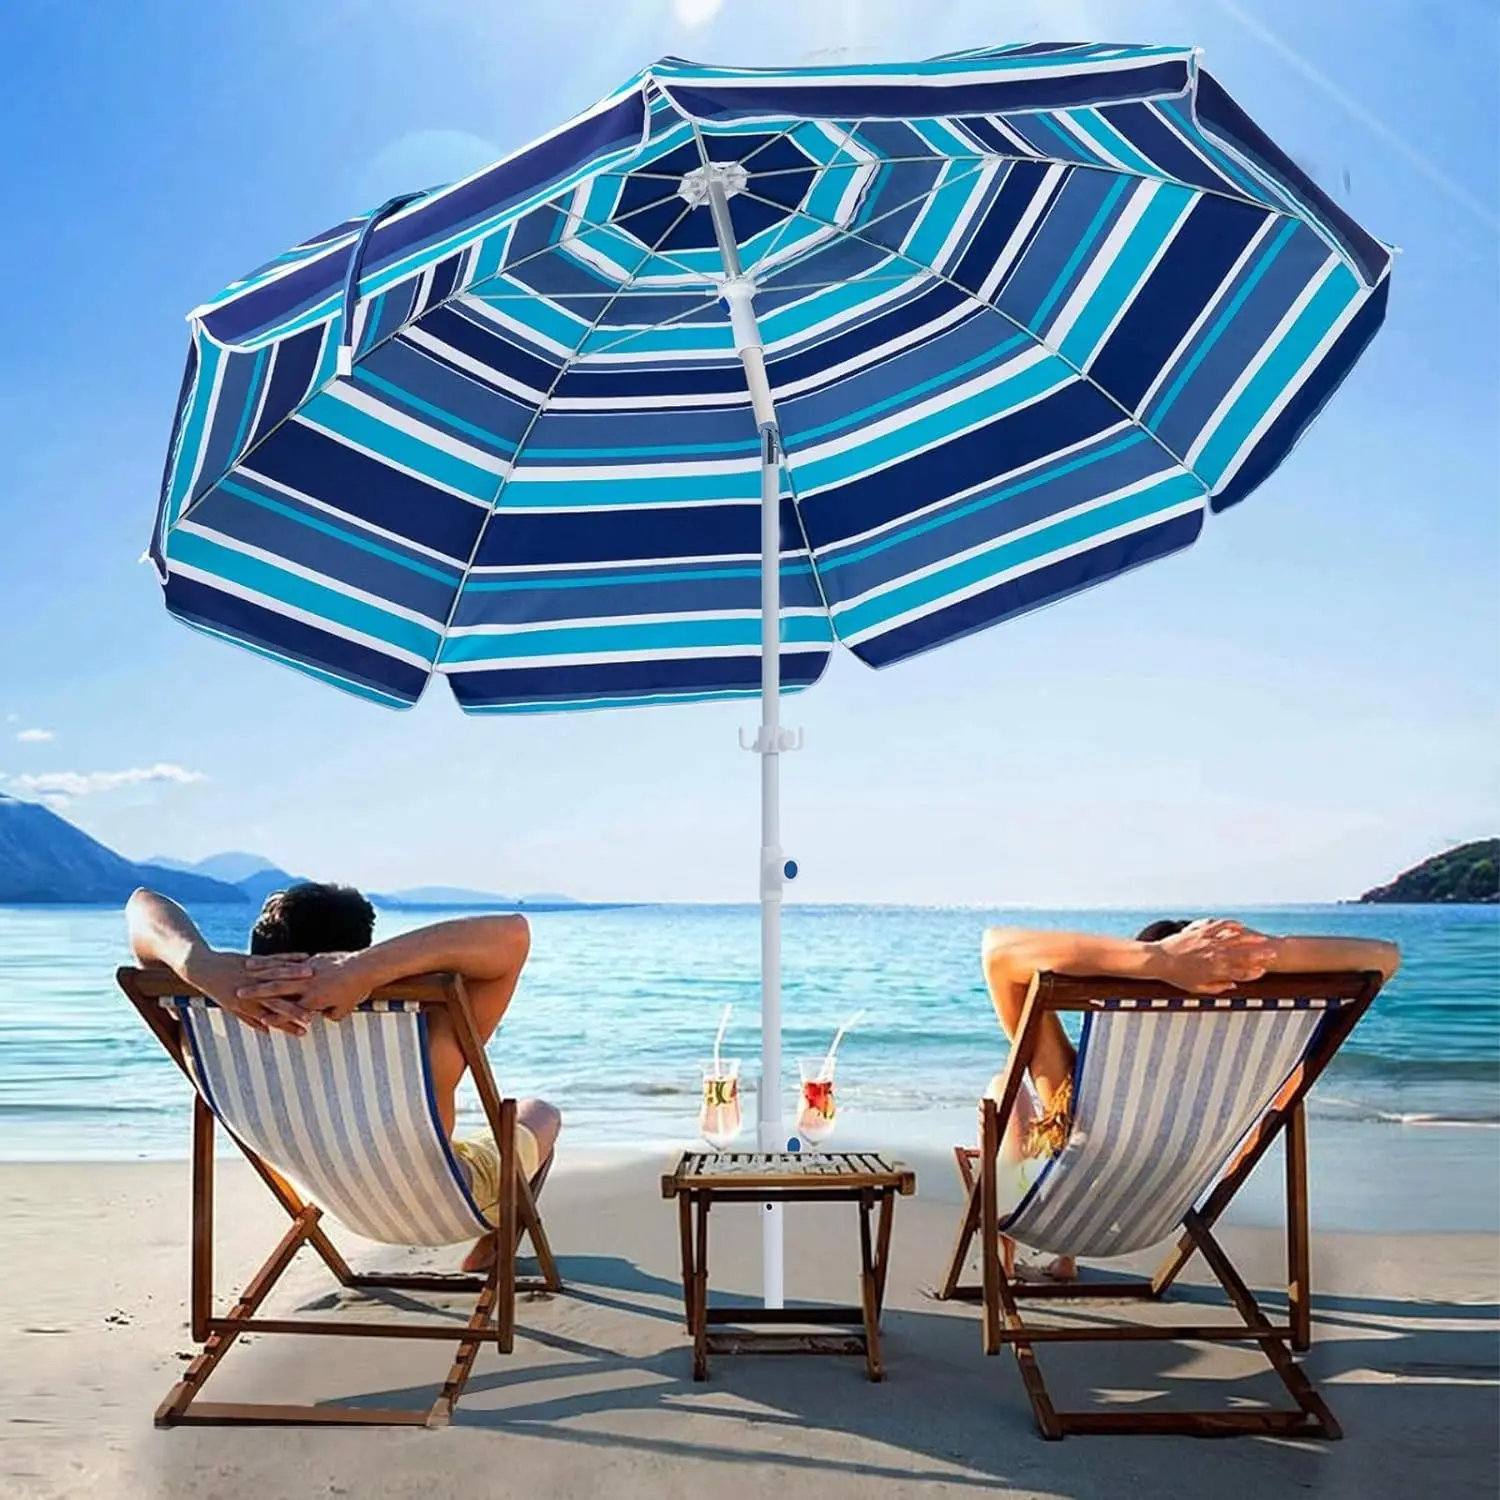 

6.5FT Beach Umbrella with Removable Sand Anchor, UV 50+ Outdoor Portable Sunshade Umbrella with Push Button Tilt and Carry Bag